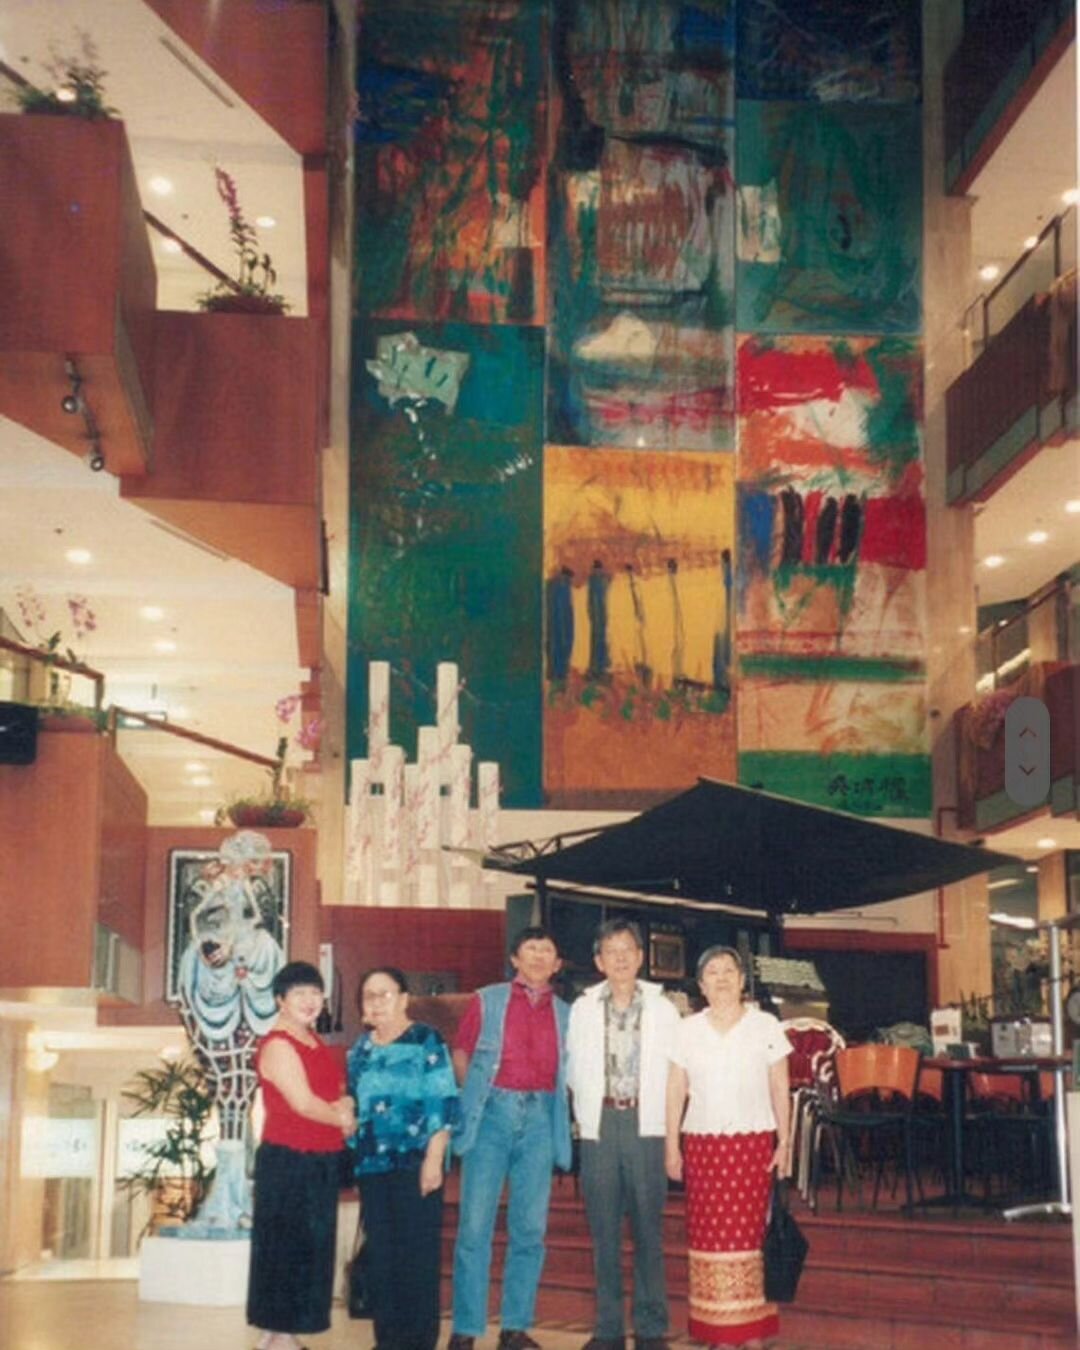 &quot;ART BODY NEEDED TO PROTECT PUBLIC ART FROM BEING DESTROYED OR LOST, SAY ARTISTS AND ART LOVERS&quot; - Shawn Hoo, Straits Times (2ndNov2023)
 
For those who have been to the old Promenade Shopping Centre (before it was demolished to make way fo